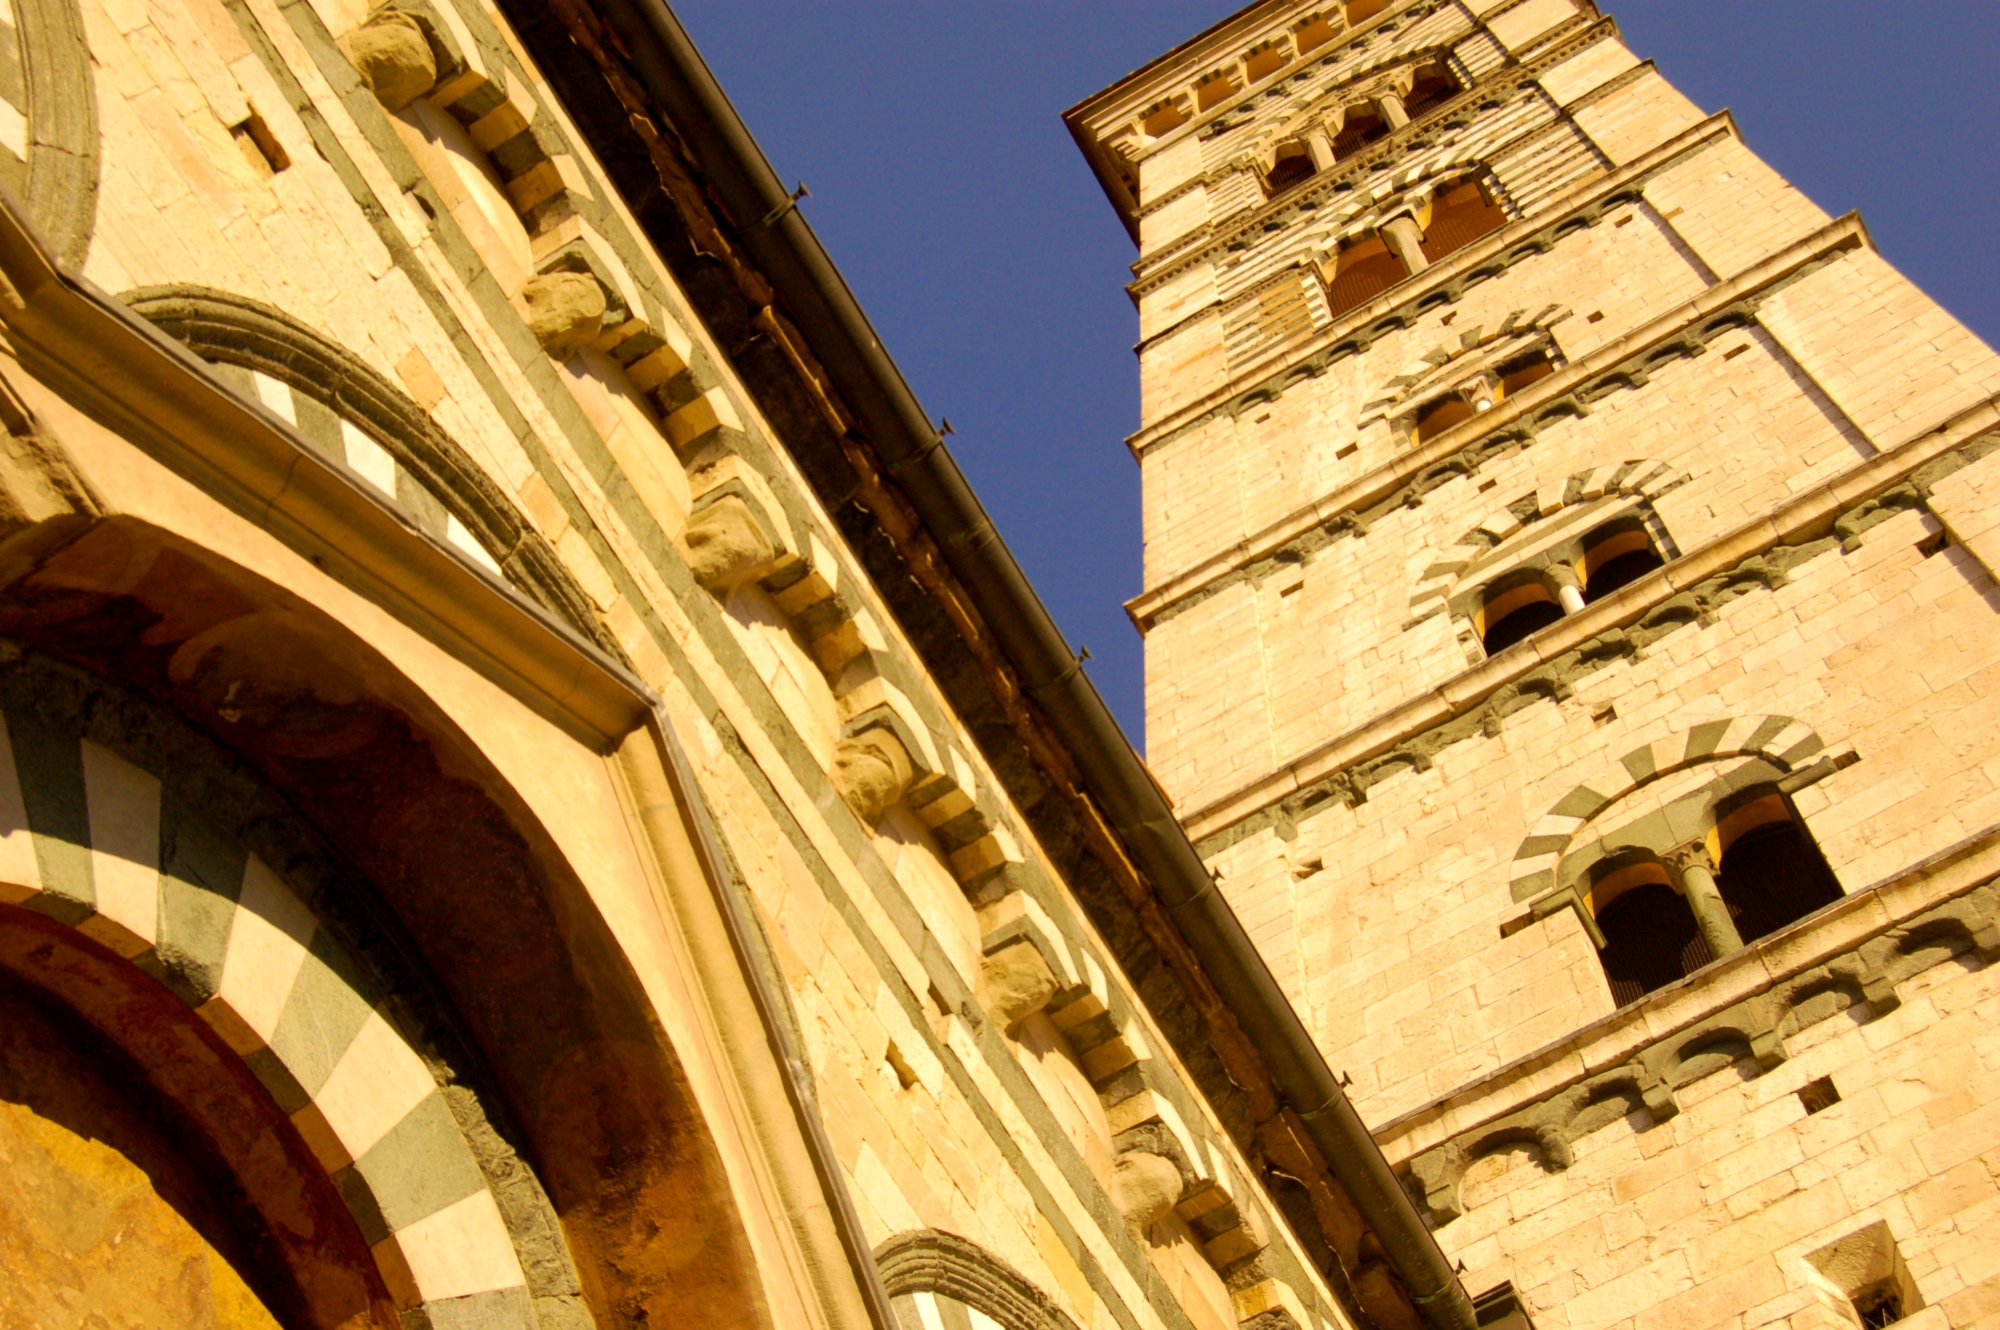 Prato's cathedral and bell tower